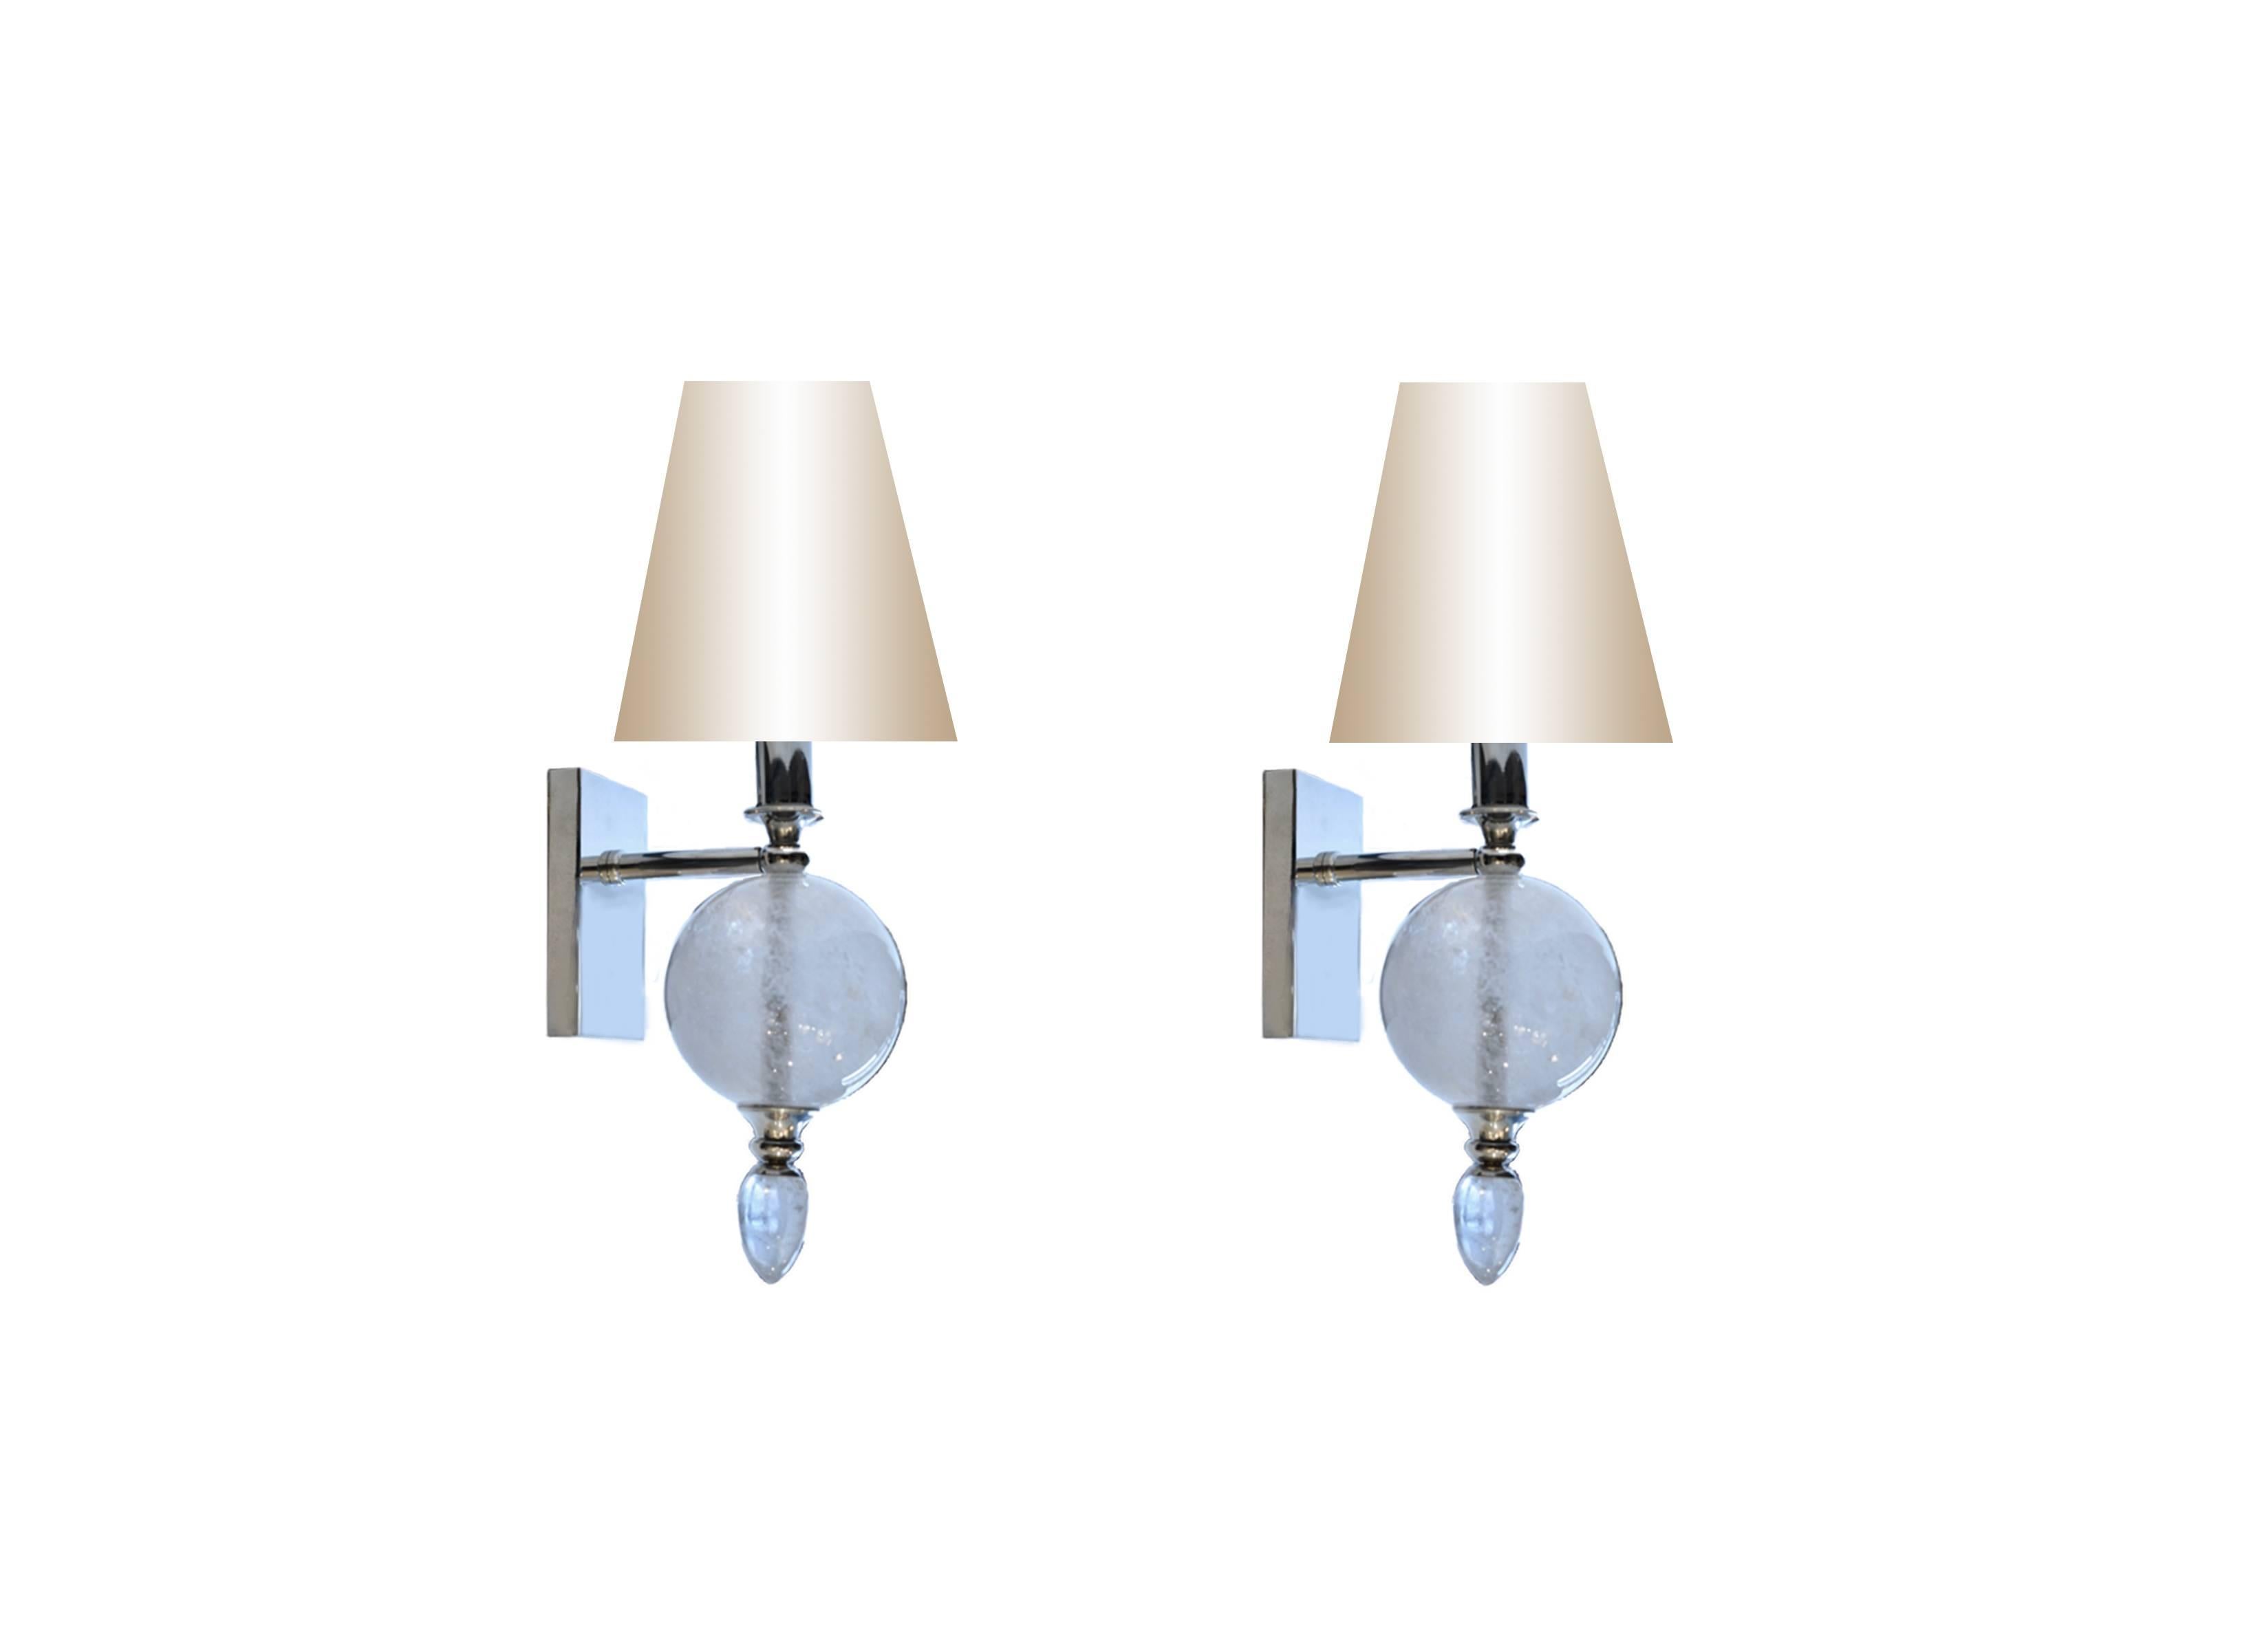 A Pair of Modern Rock Crystal Sconces with nickel plating finsih. 
